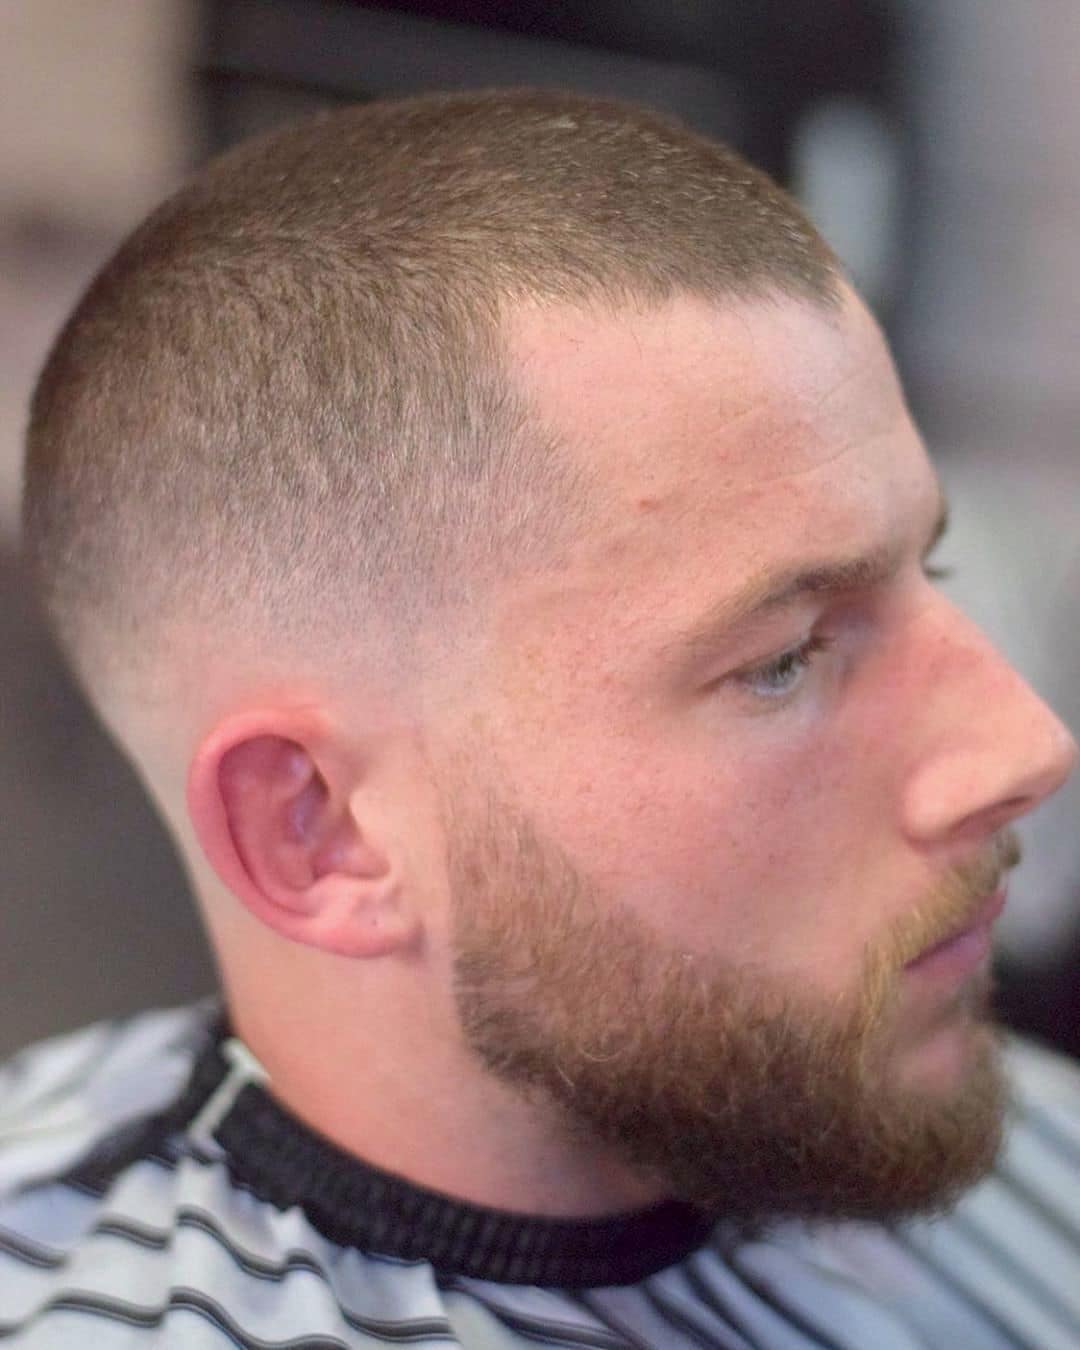 Military haircut with a low fade